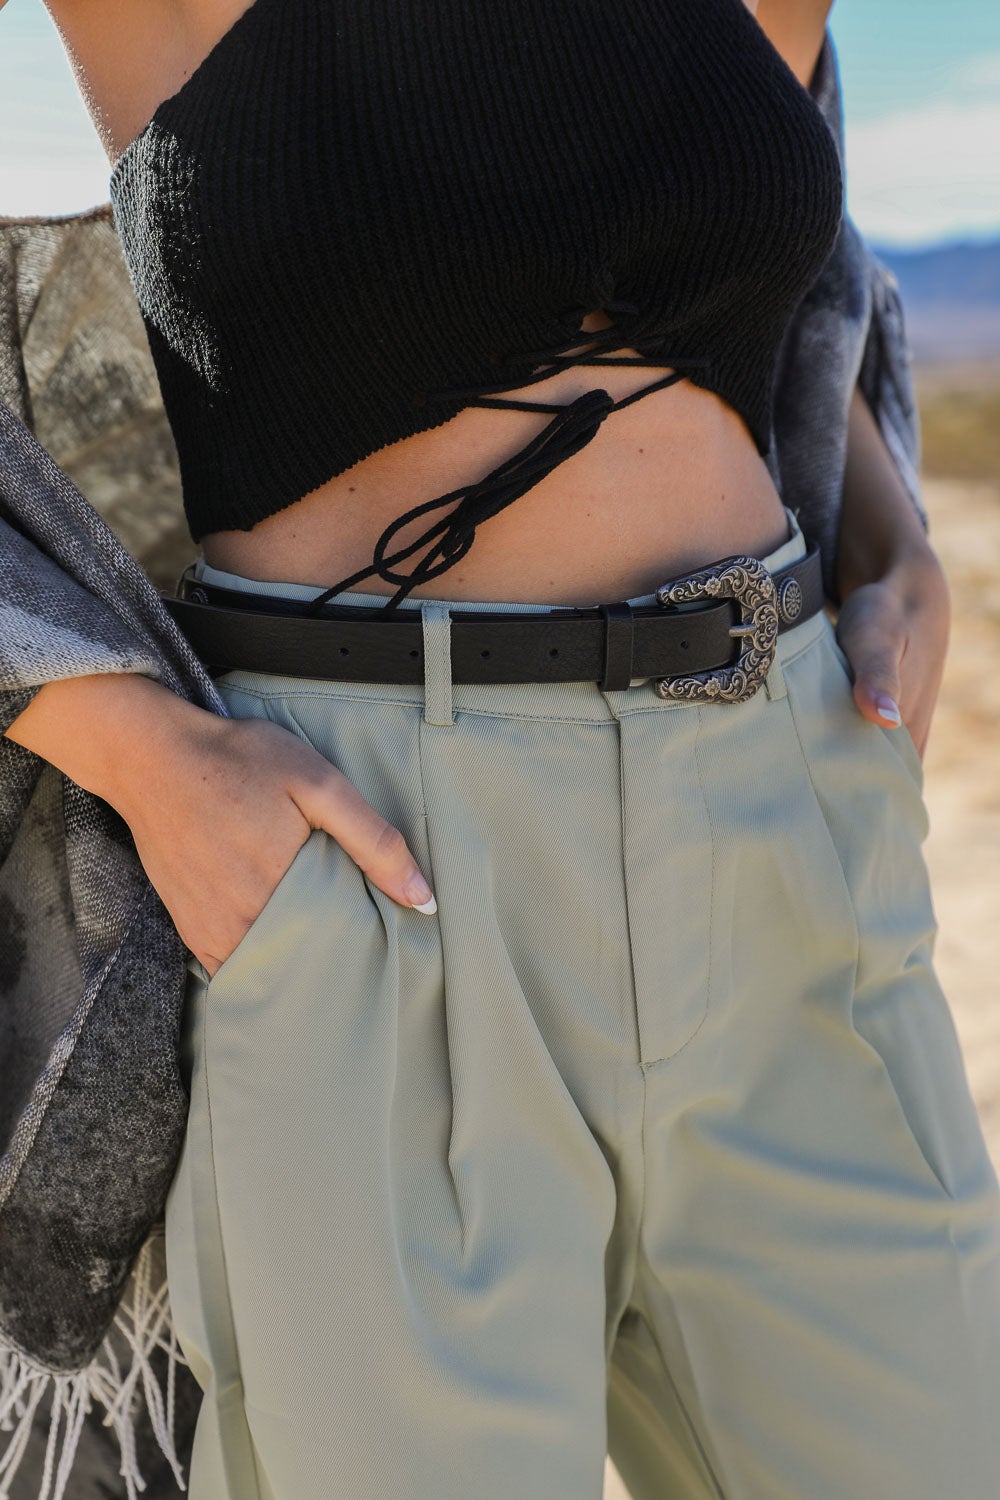 Can you wear designer belts instead of a cowboy belt with a cowboy